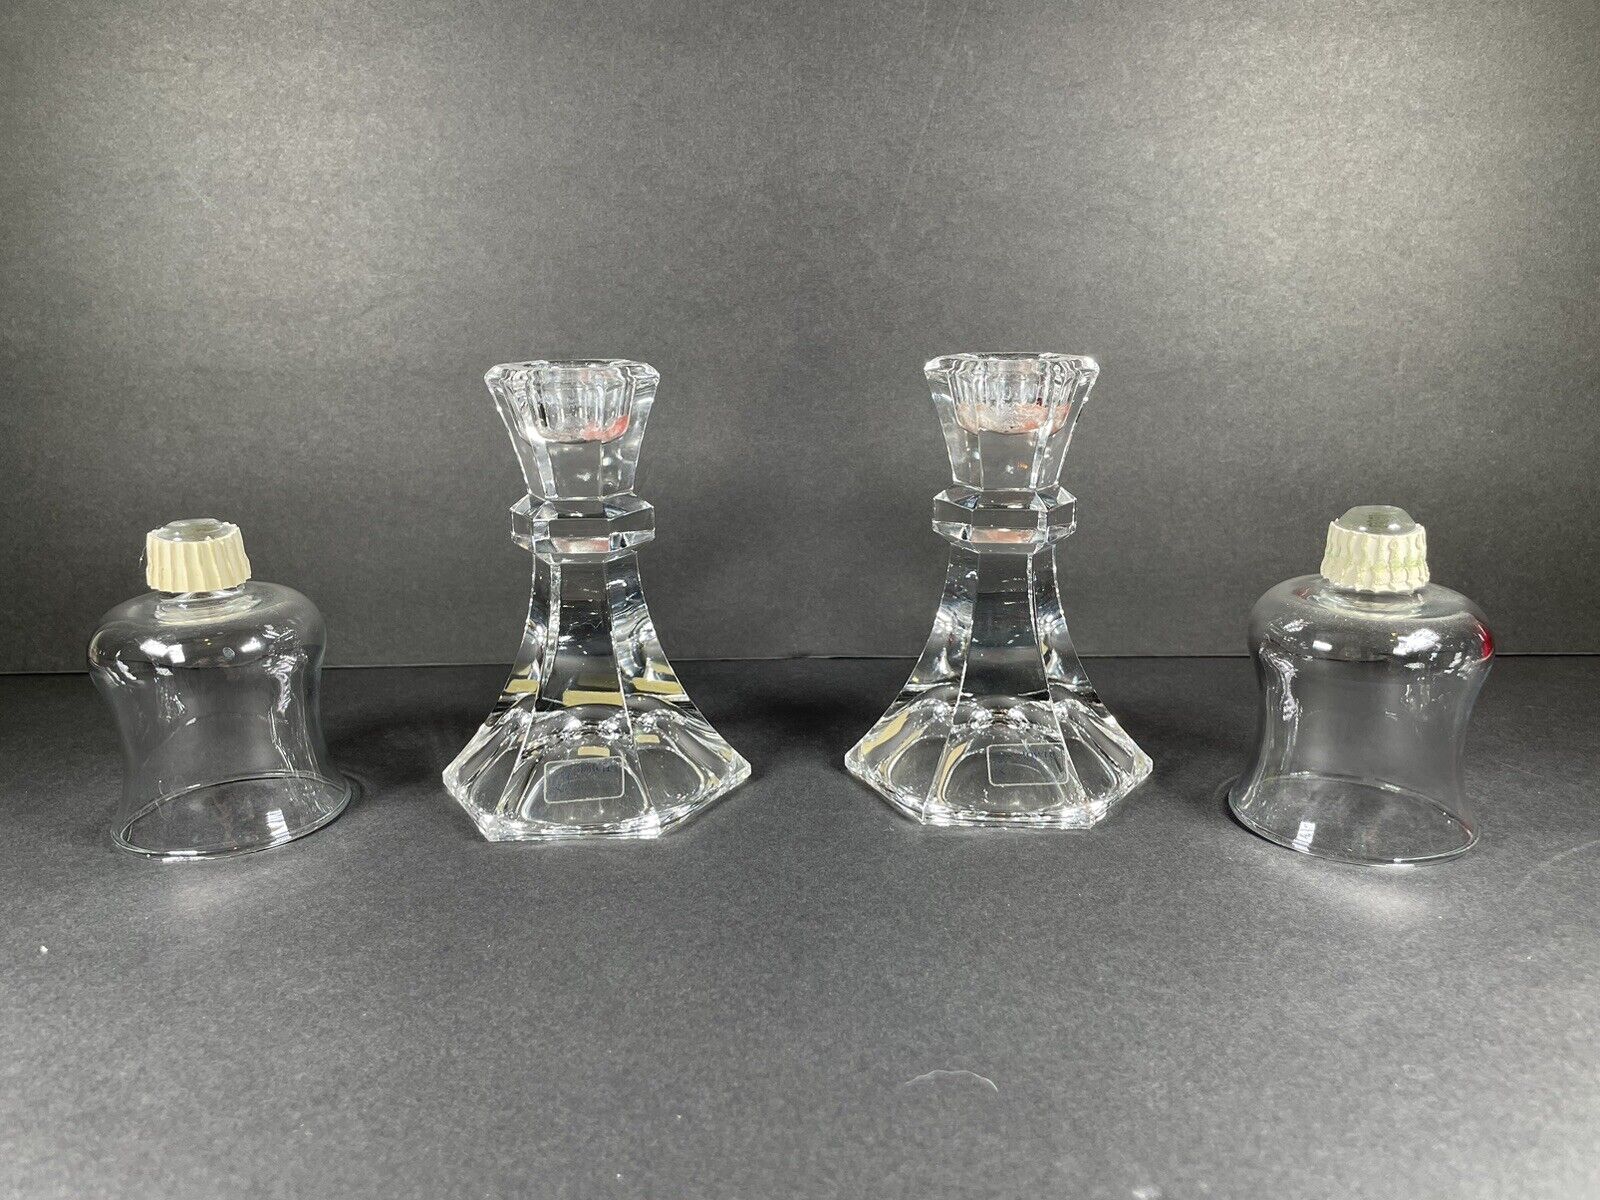 Towle 24% Lead Crystal Lot of 2  5”  Tall Candle Stick Holders With Votives